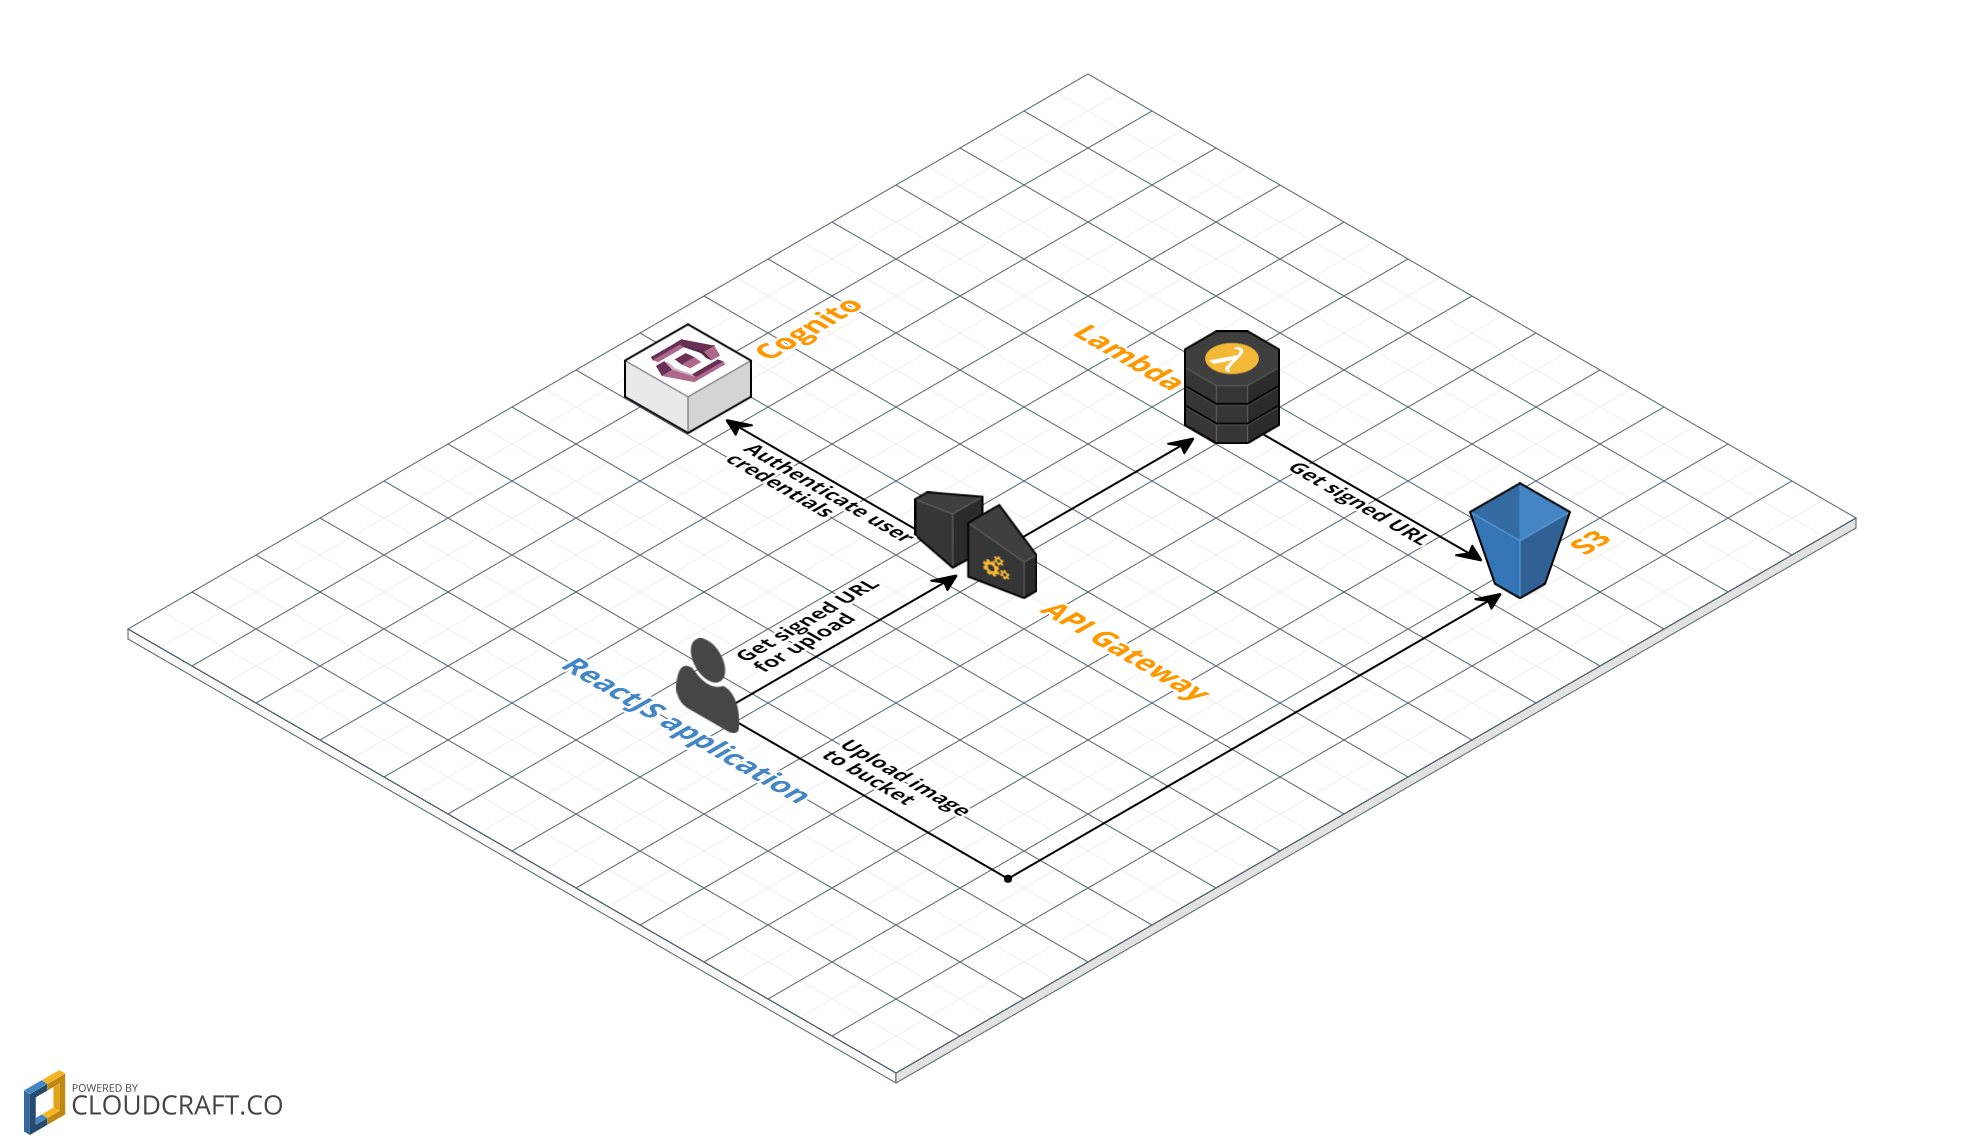 The architecture for uploading files to S3 using a pre-signed URL generated by AWS Lambda.